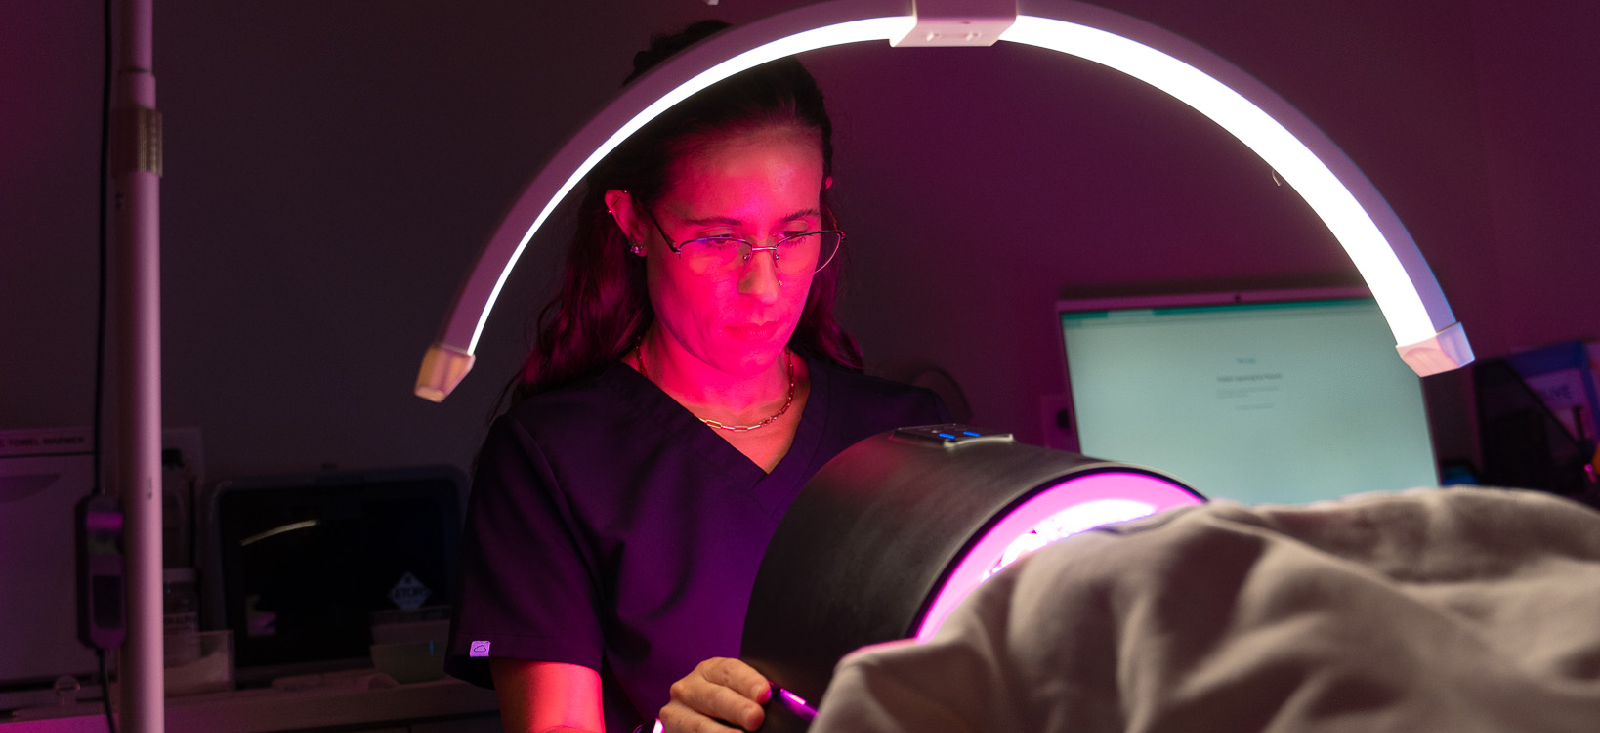 relive health hendersonville medspa employee administering LED light therapy to patient 2 1600x733 1